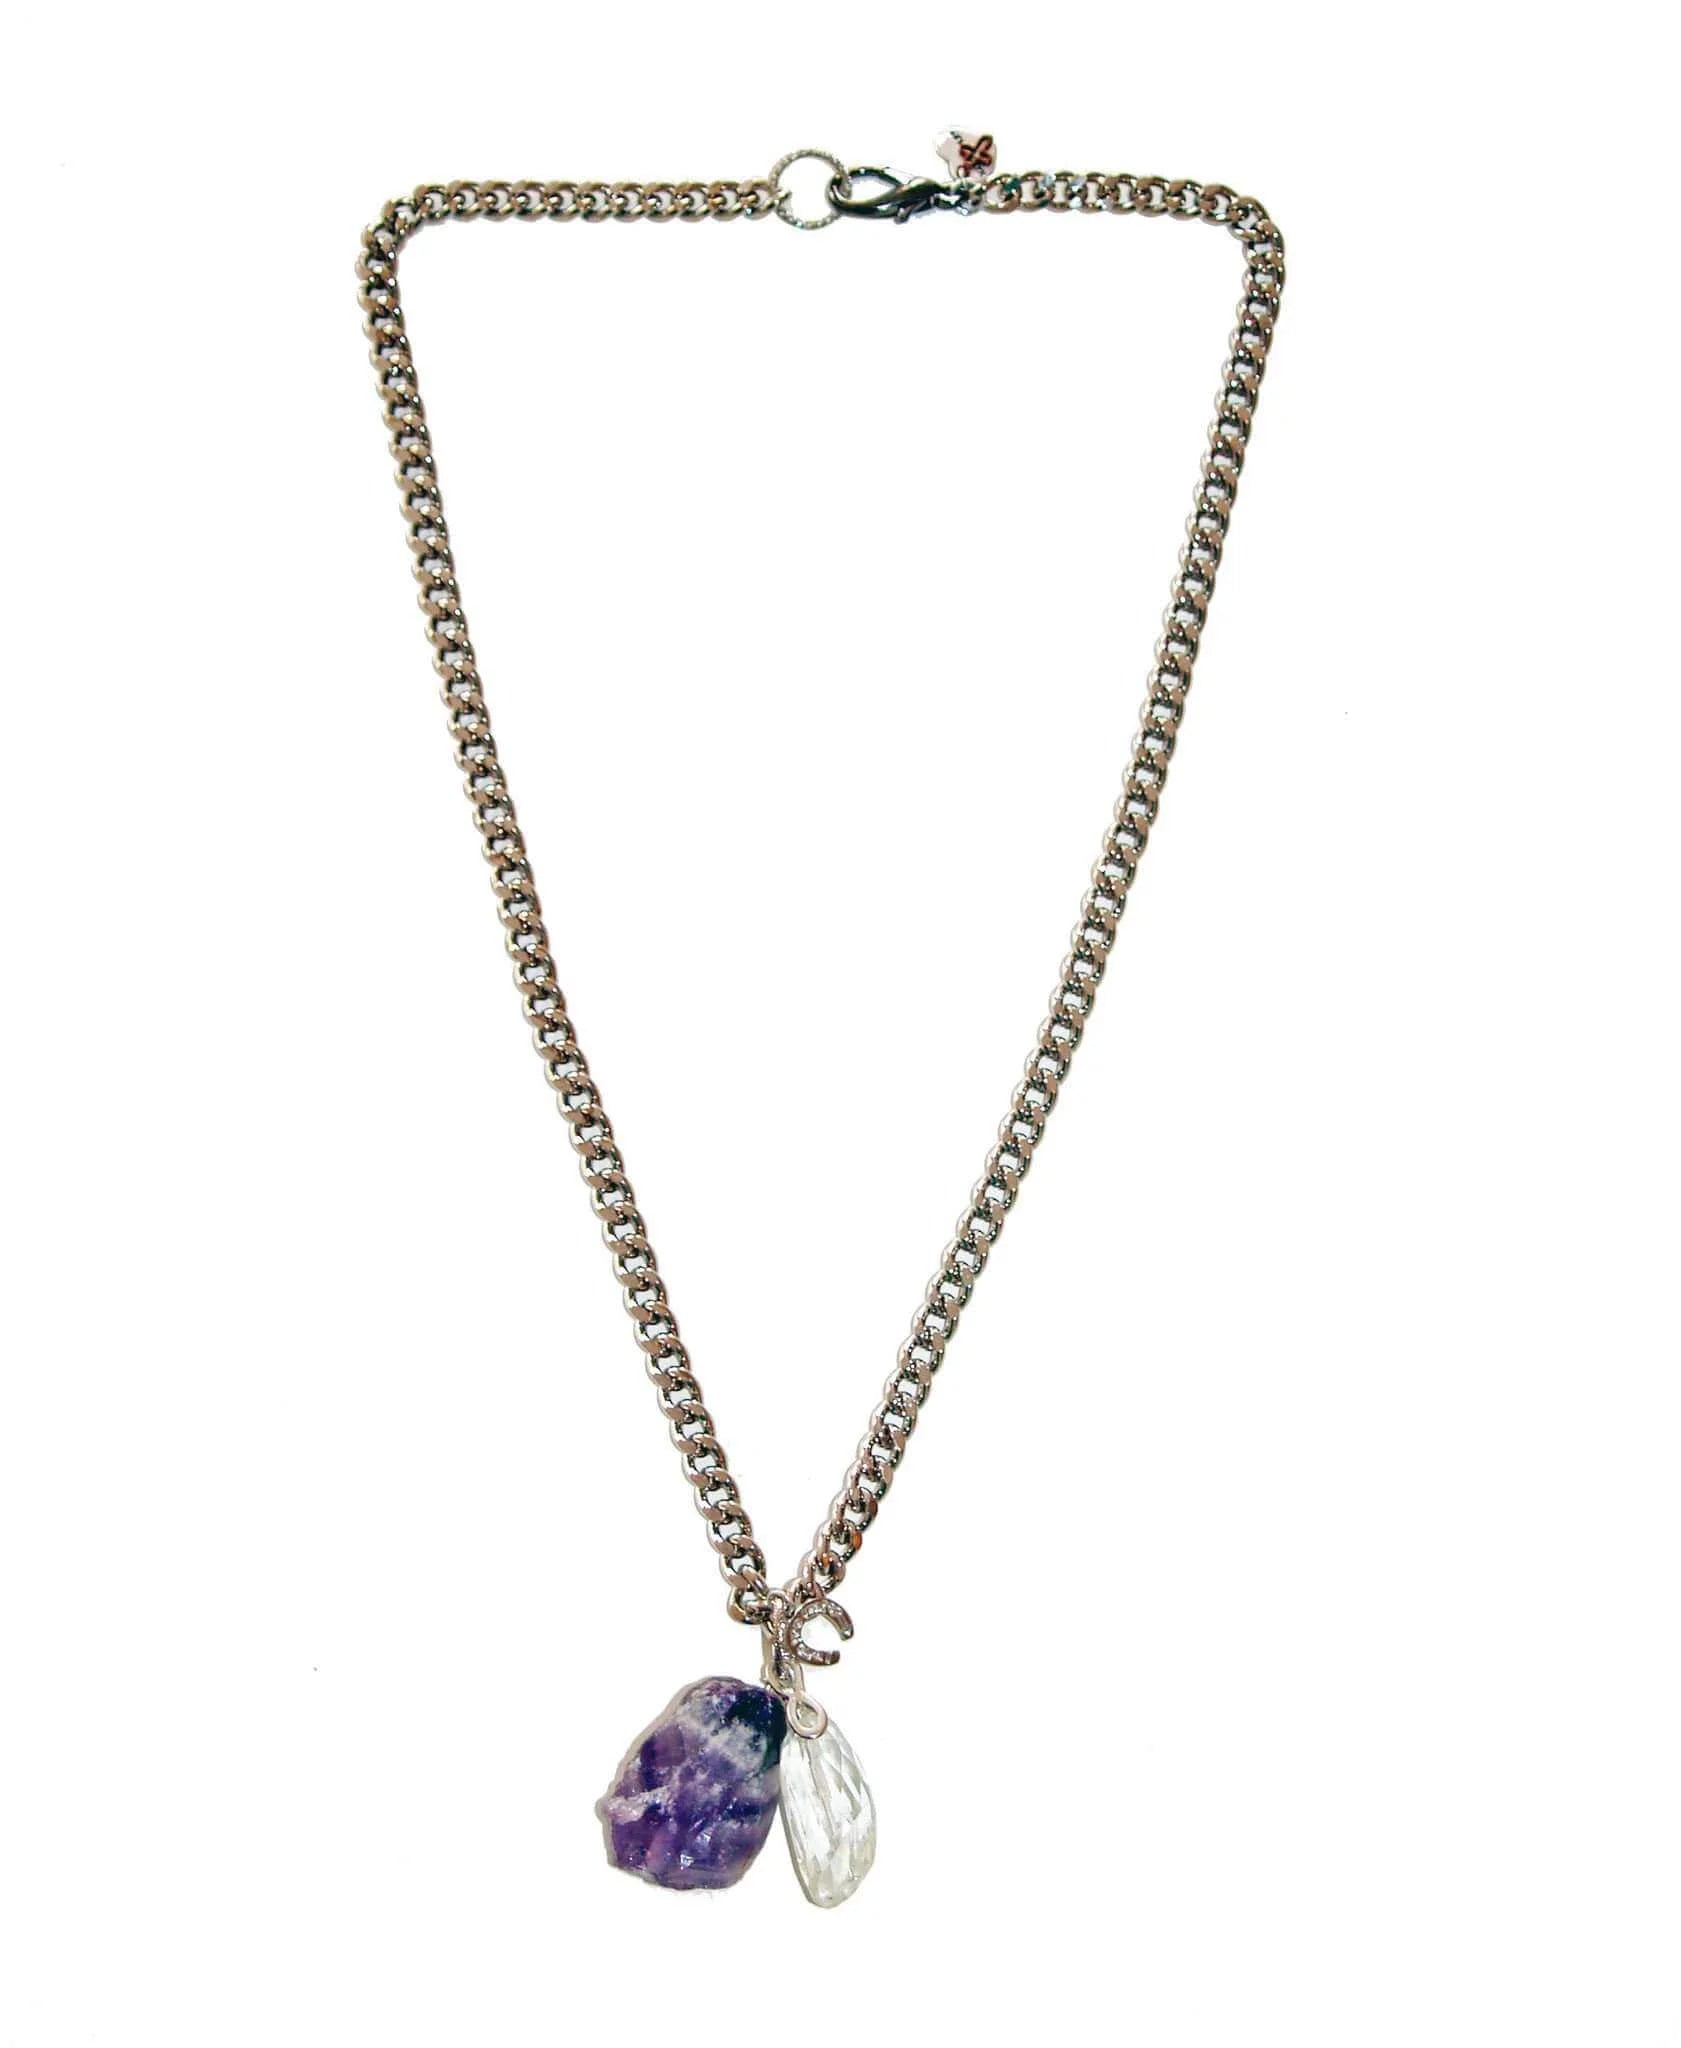 Silver necklace with amethyst and rock crystal stones - Maiden-Art